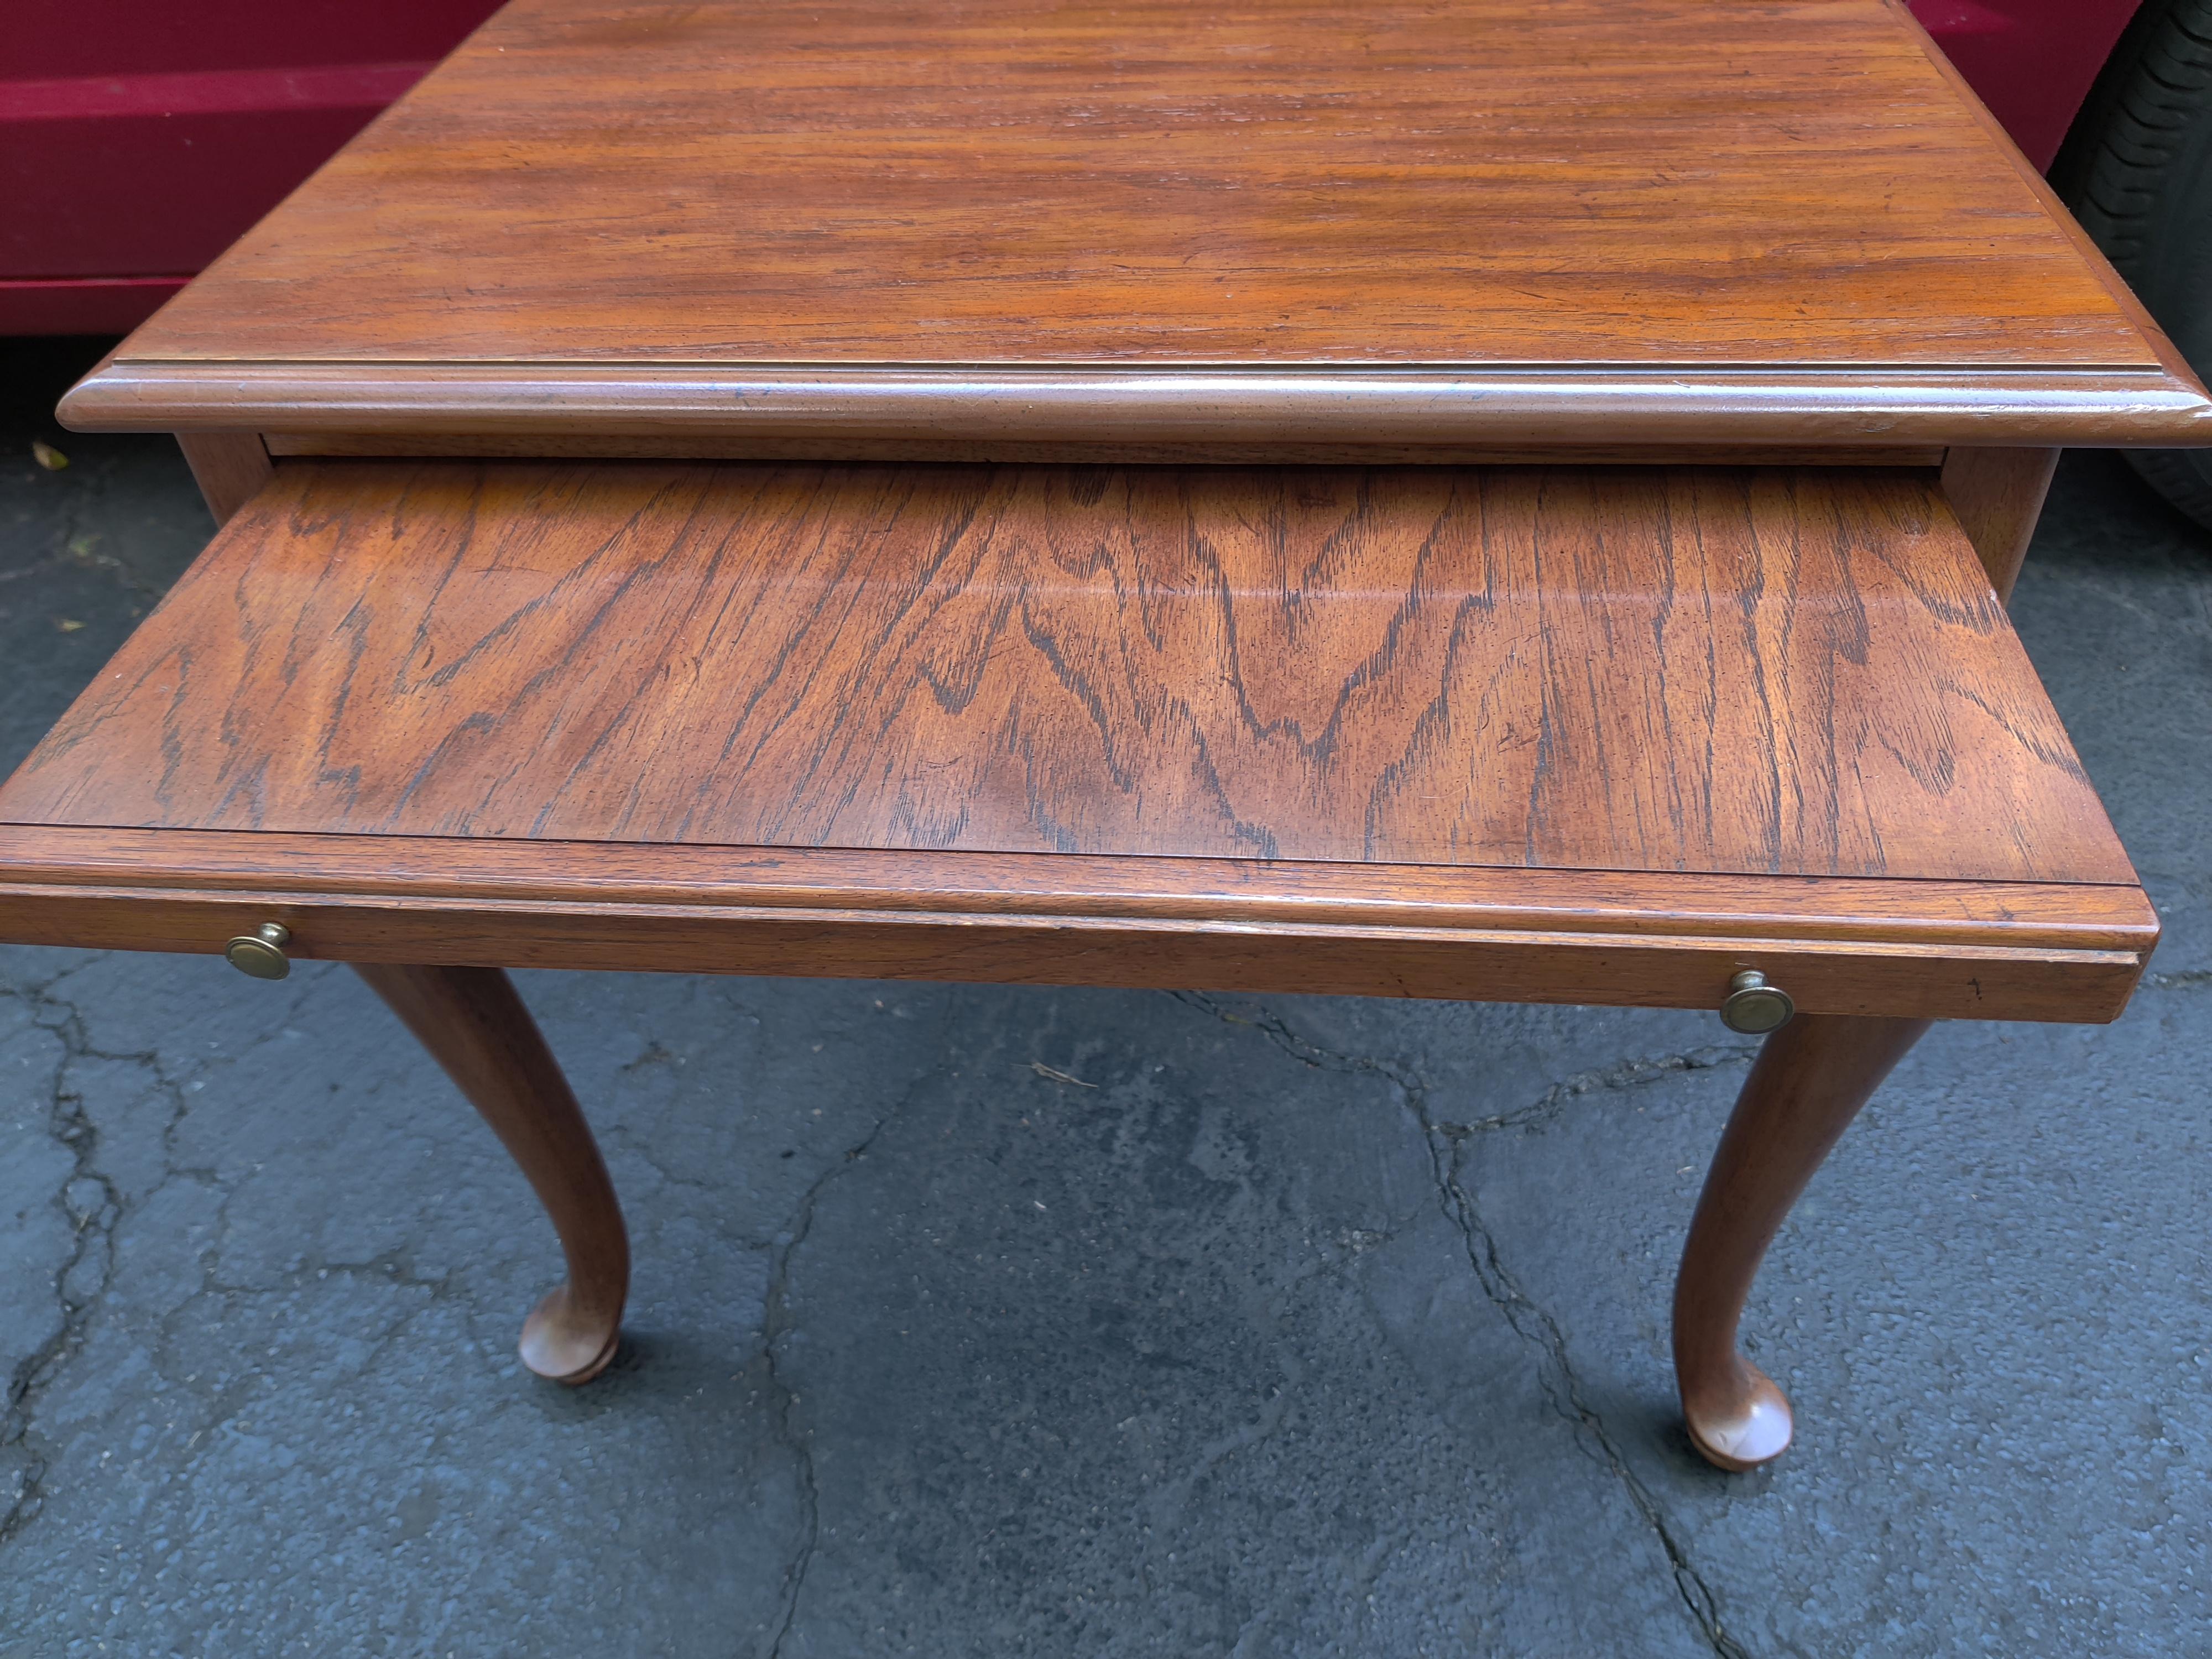 Drexel Tea Table w/Shelf and Queen Anne Legs In Good Condition For Sale In Cincinnati, OH